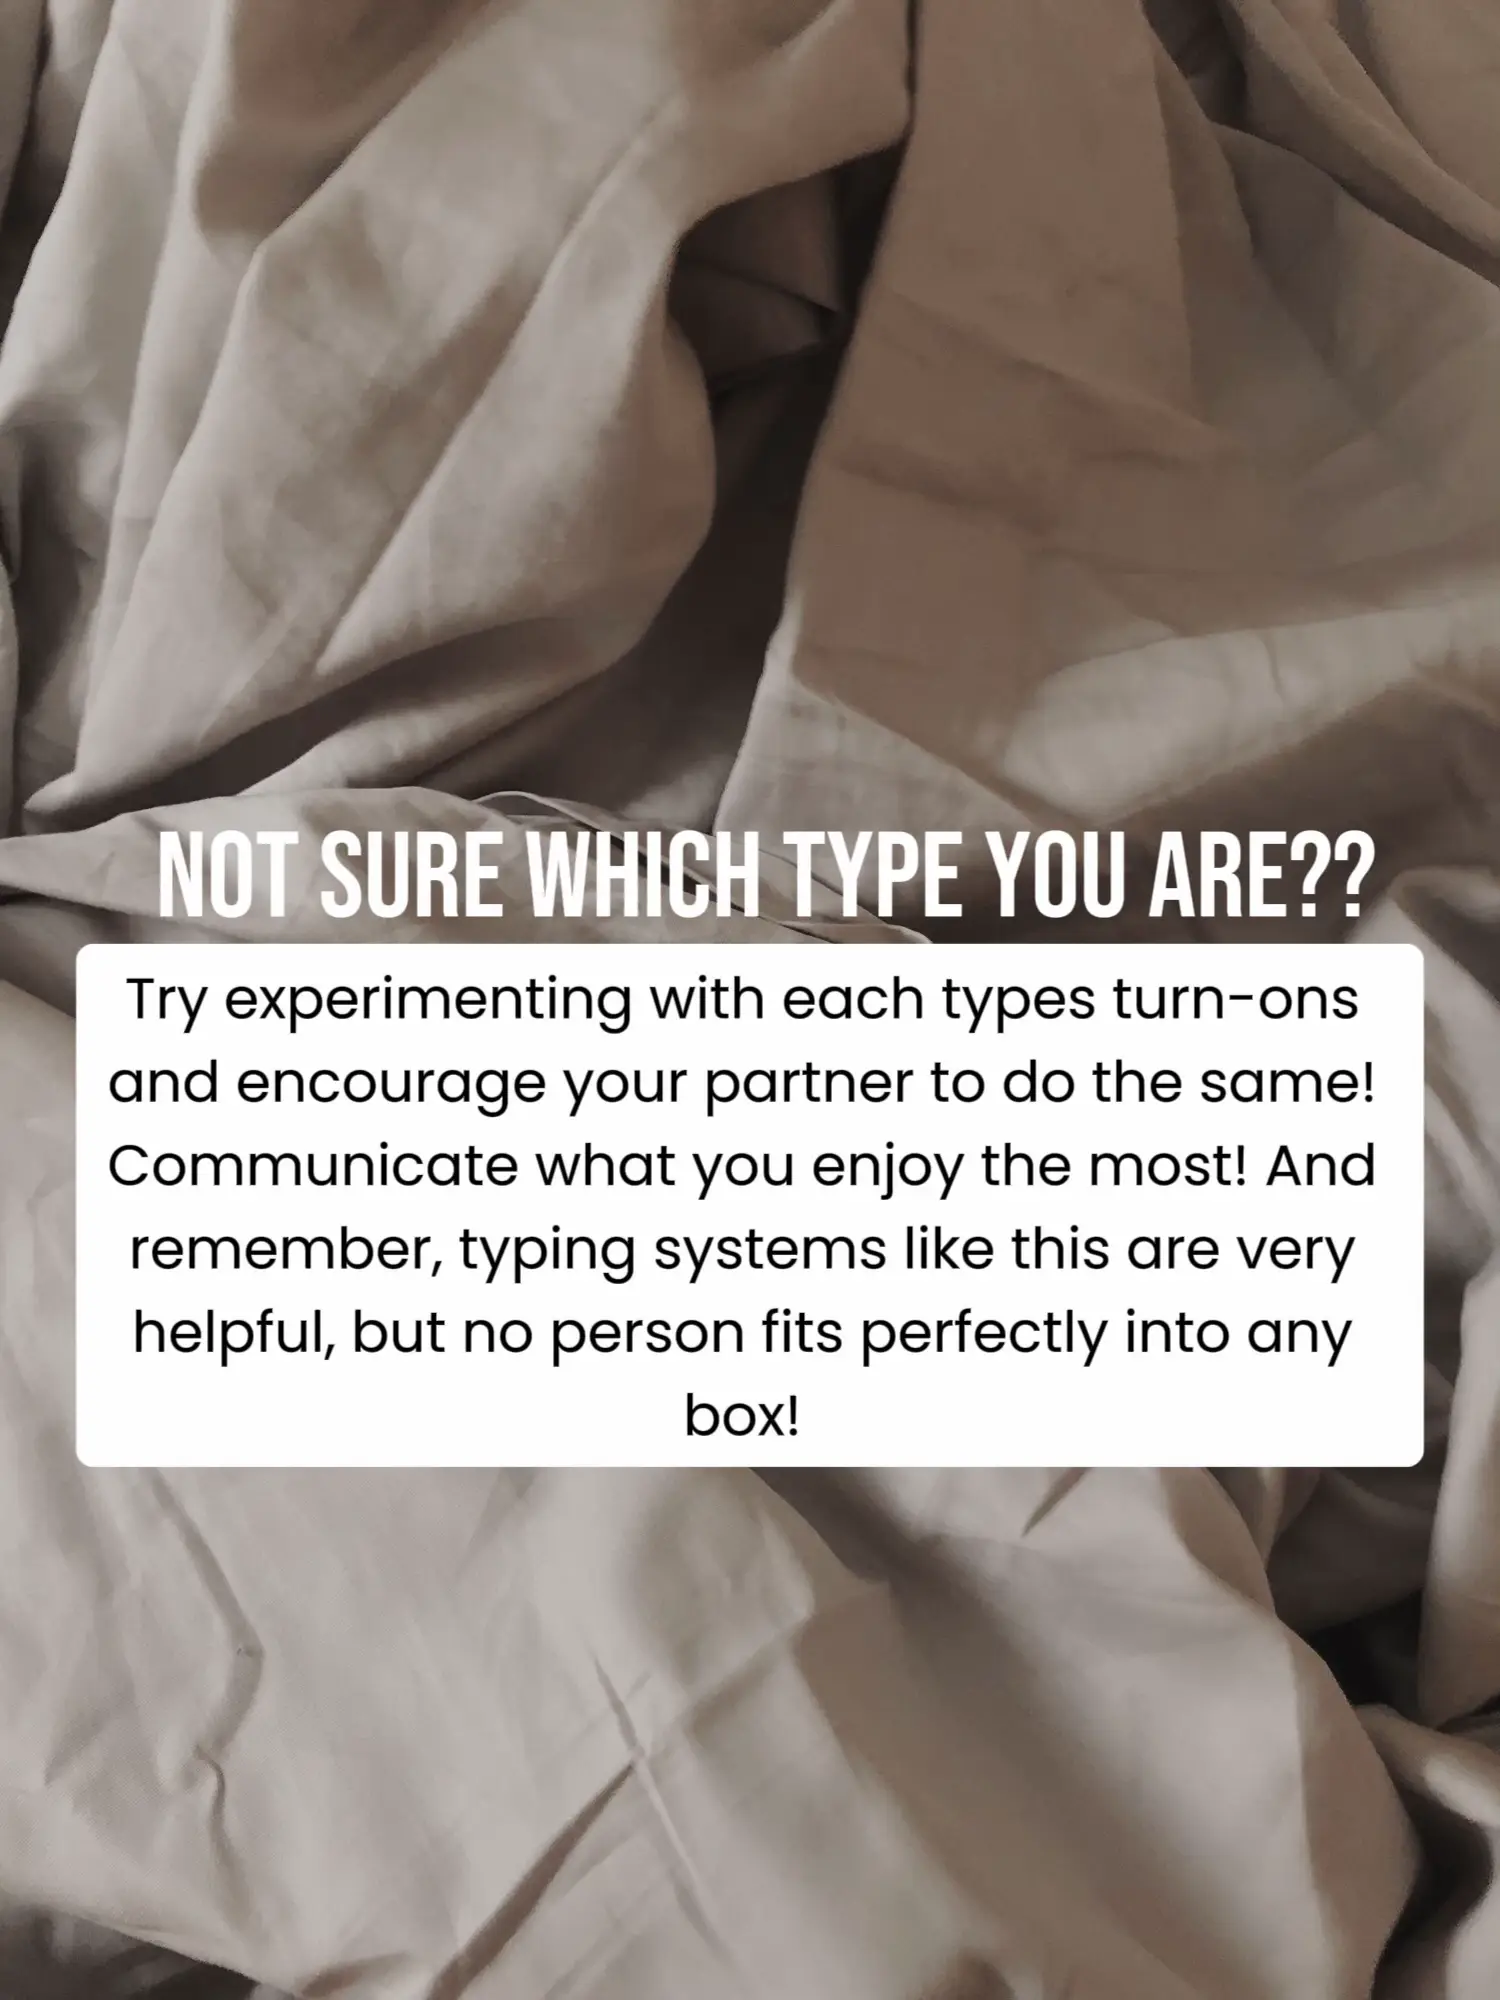  A text that says "Try experimenting with each types turn-ons and encourage your partner to do the same! Communicate what you enjoy the most! And remember, typing systems like this are very helpful, but no person fits perfectly into any box!"